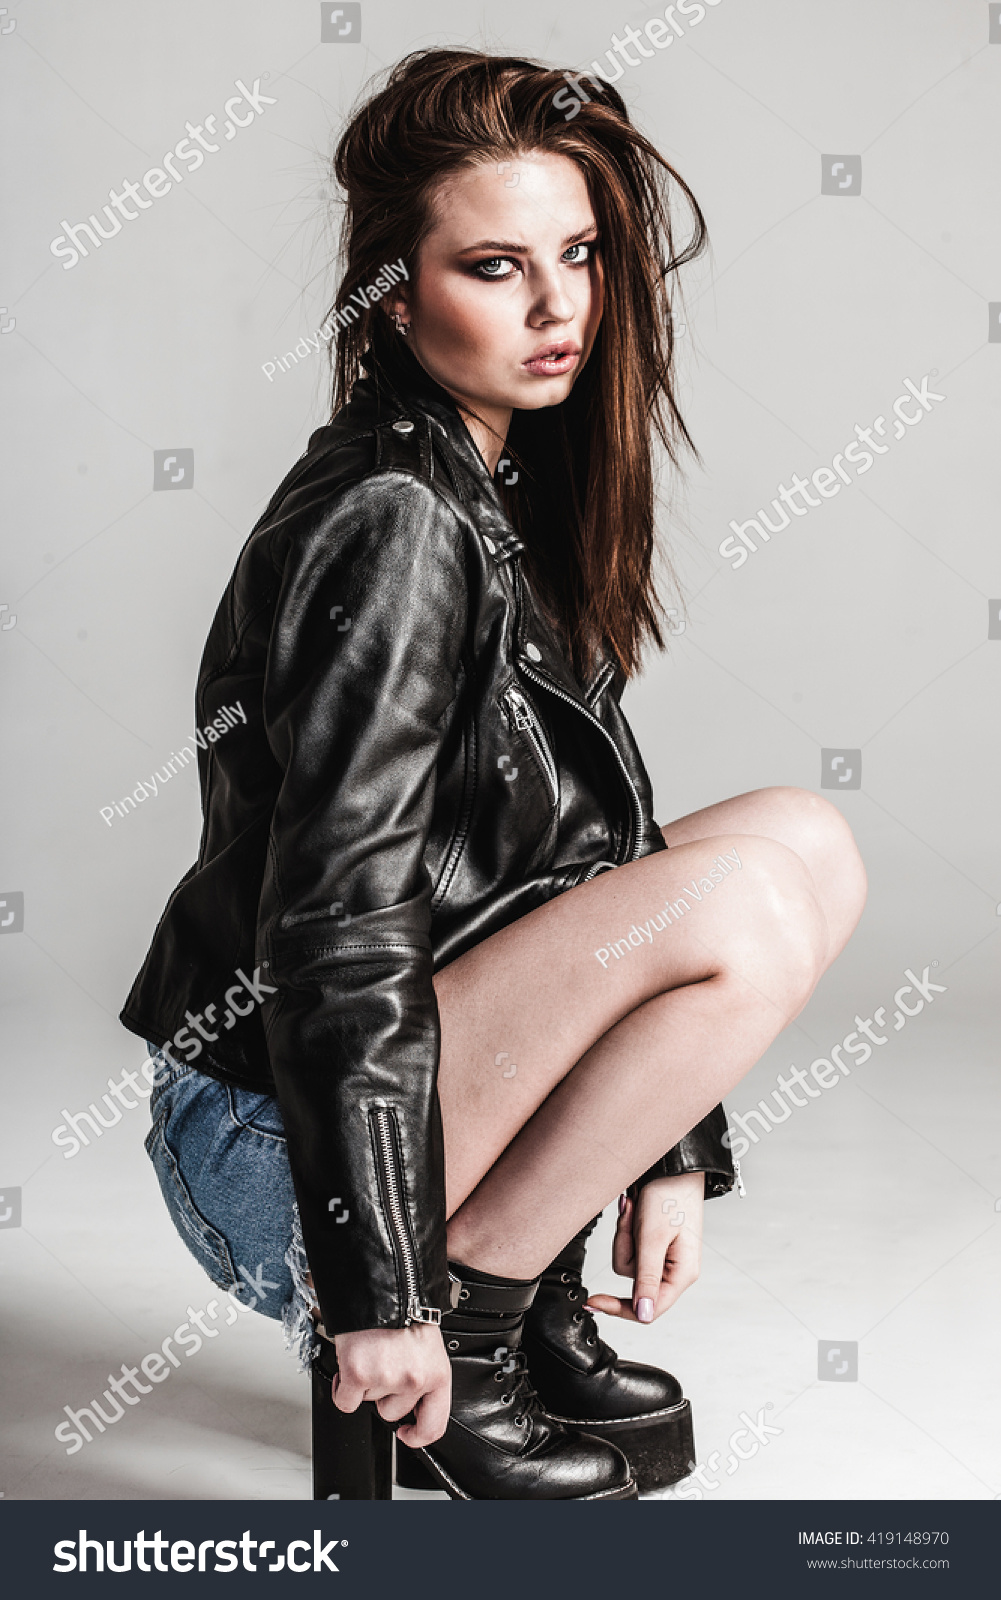 Young Pretty Sexy Woman Leather Jacket Stock Photo 419148970 | Shutterstock